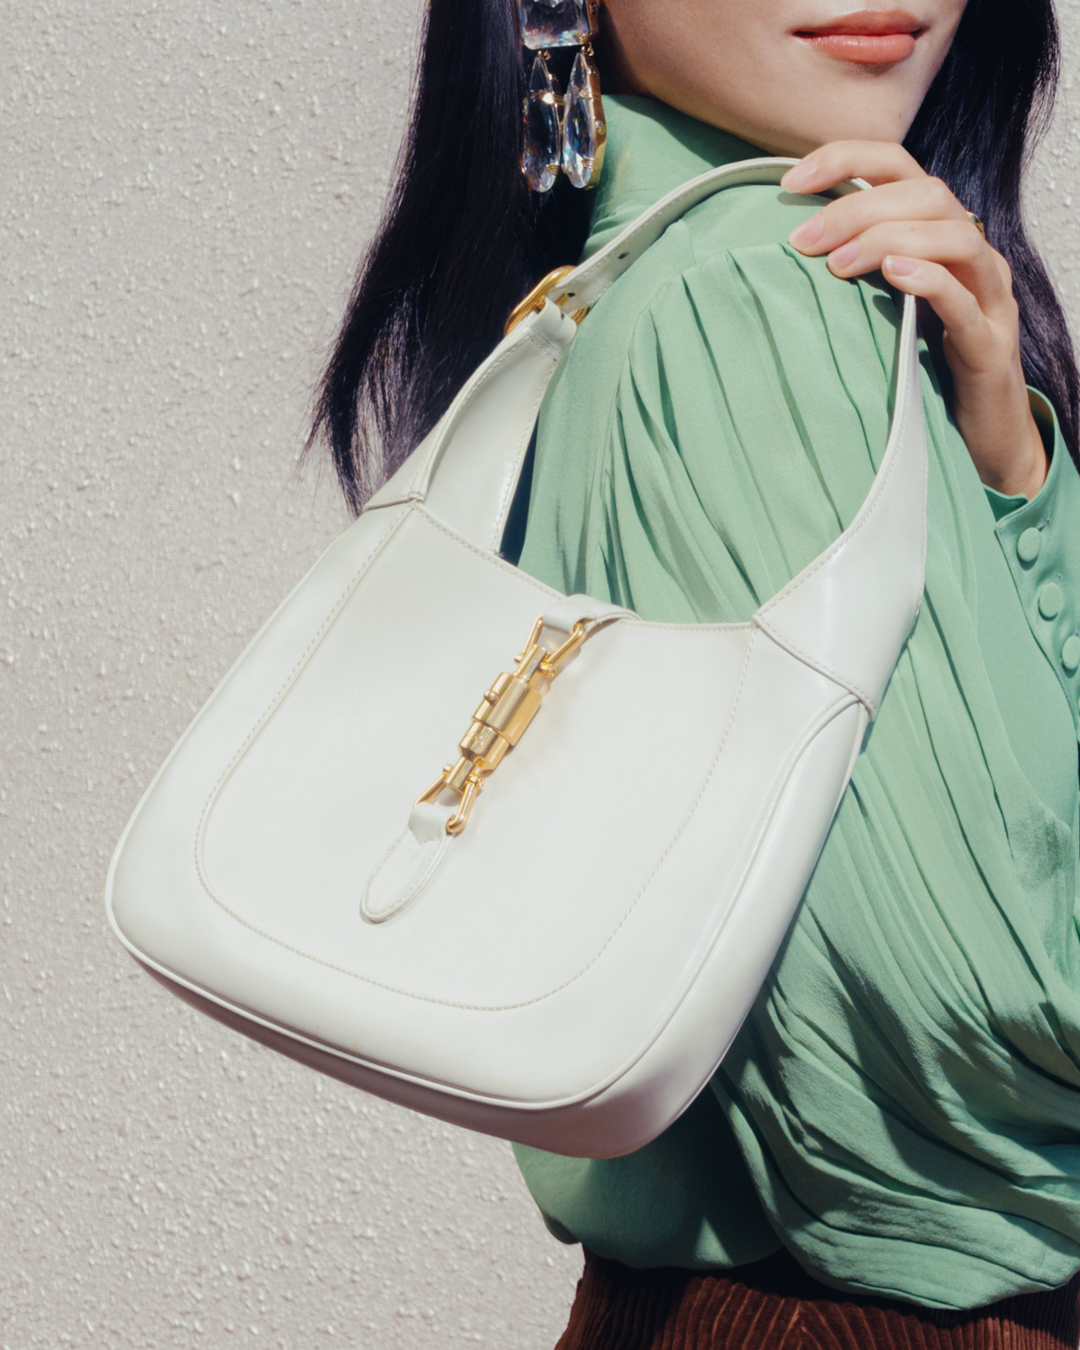 image of a woman posing with a white gucci jackie handbag